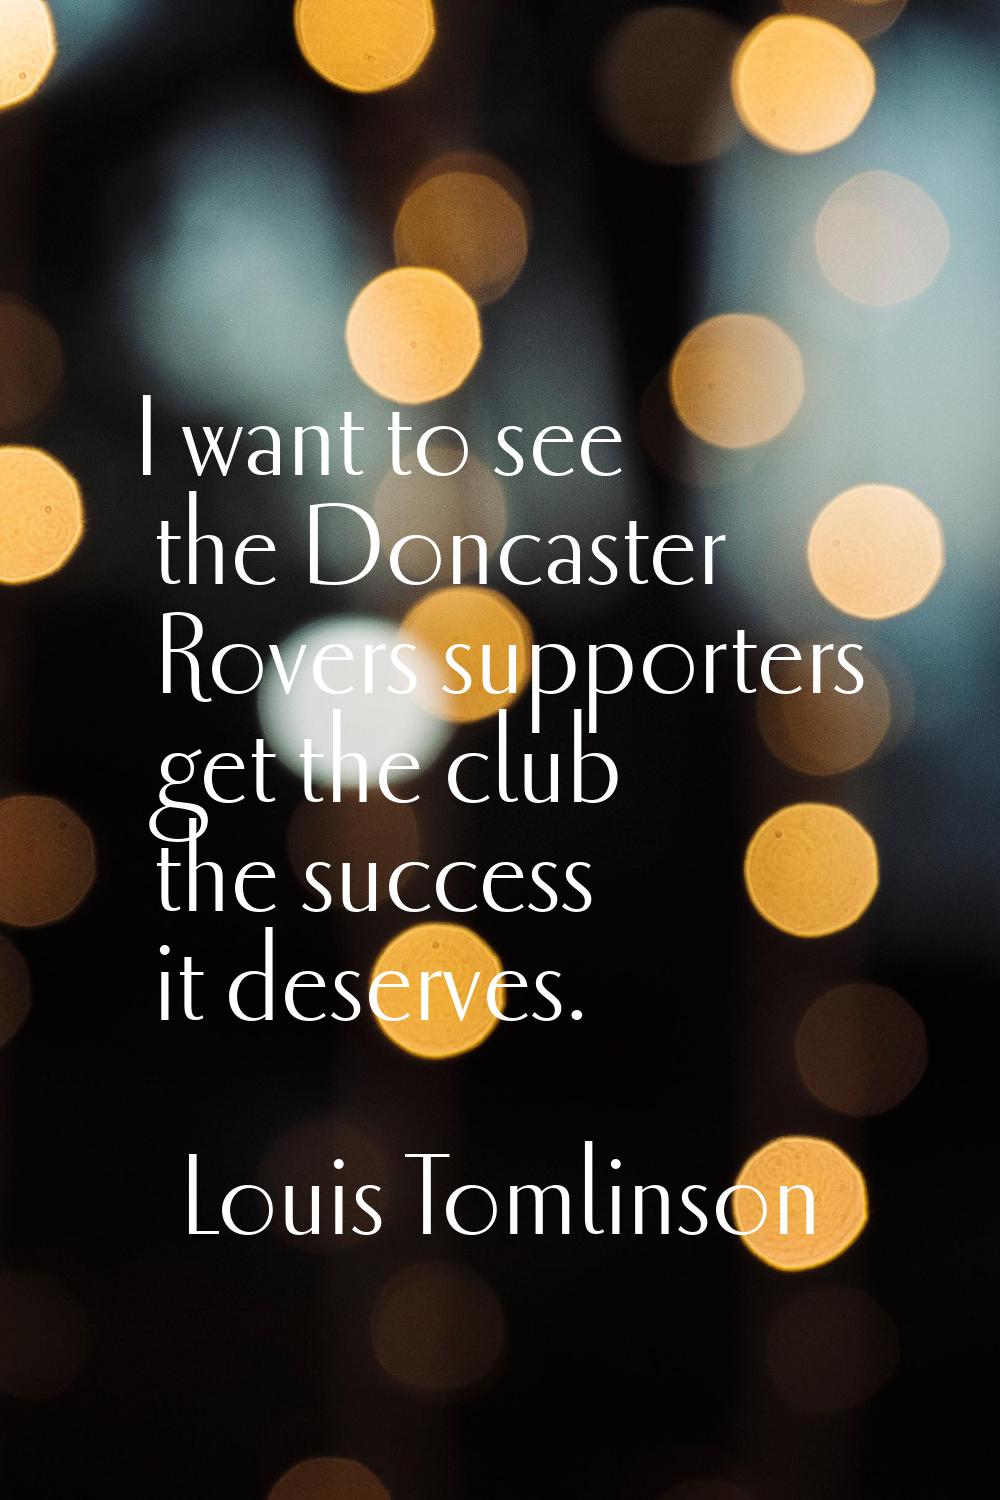 I want to see the Doncaster Rovers supporters get the club the success it deserves.